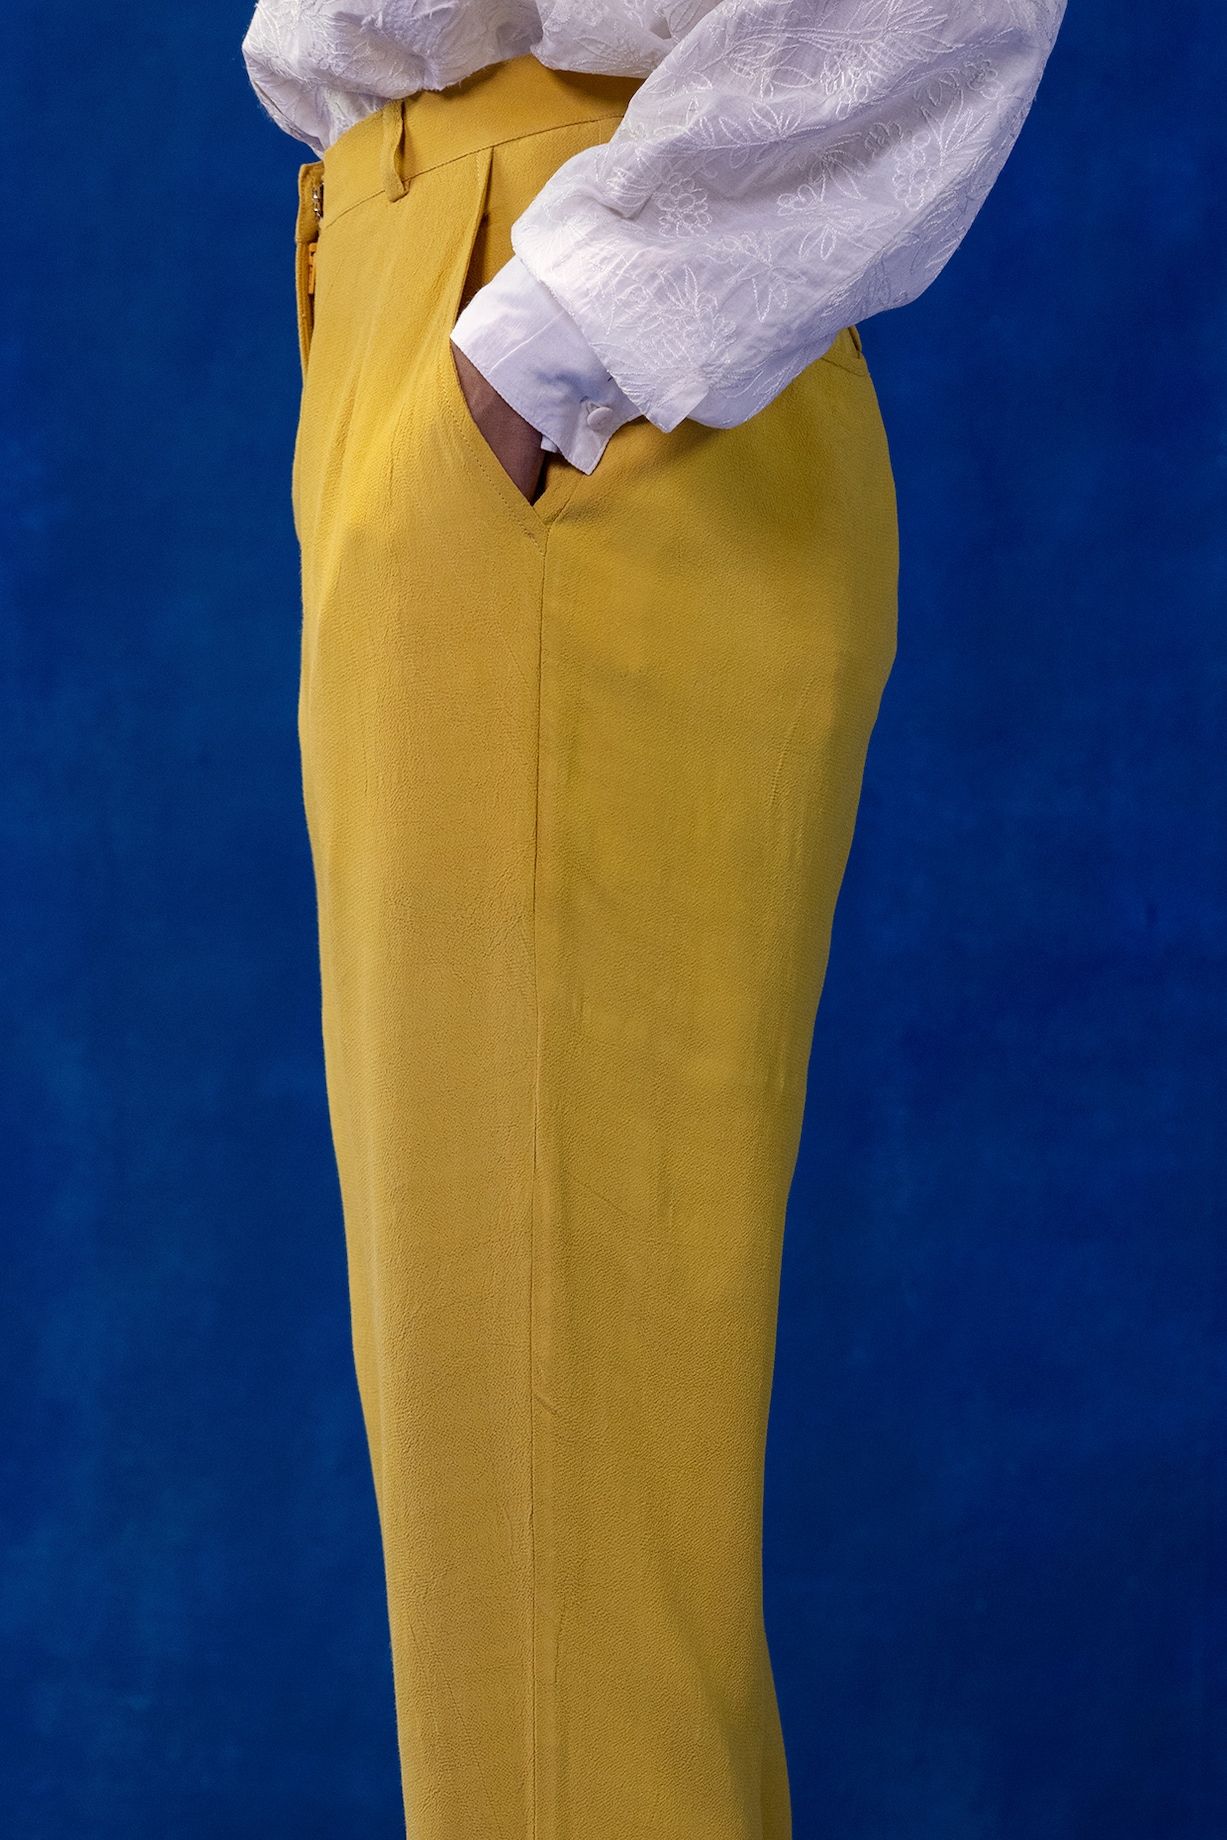 Spicy Mustard Heavy Crepe Pants Design by Kauza at Pernia's Pop Up Shop 2024